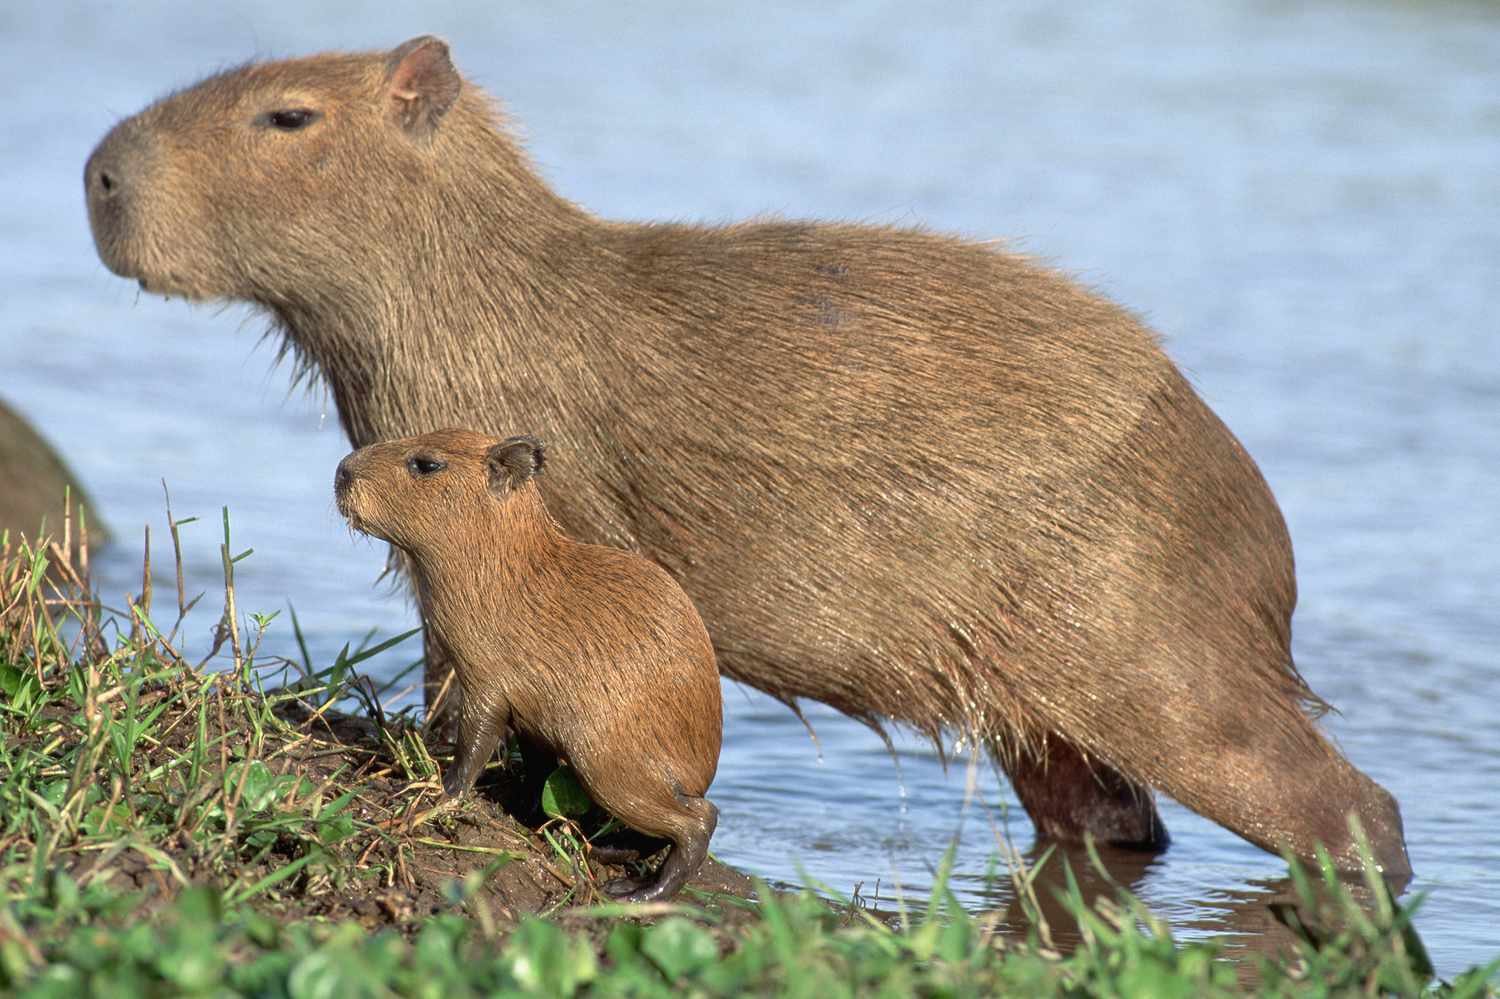 10 Fascinating Facts about Capybaras